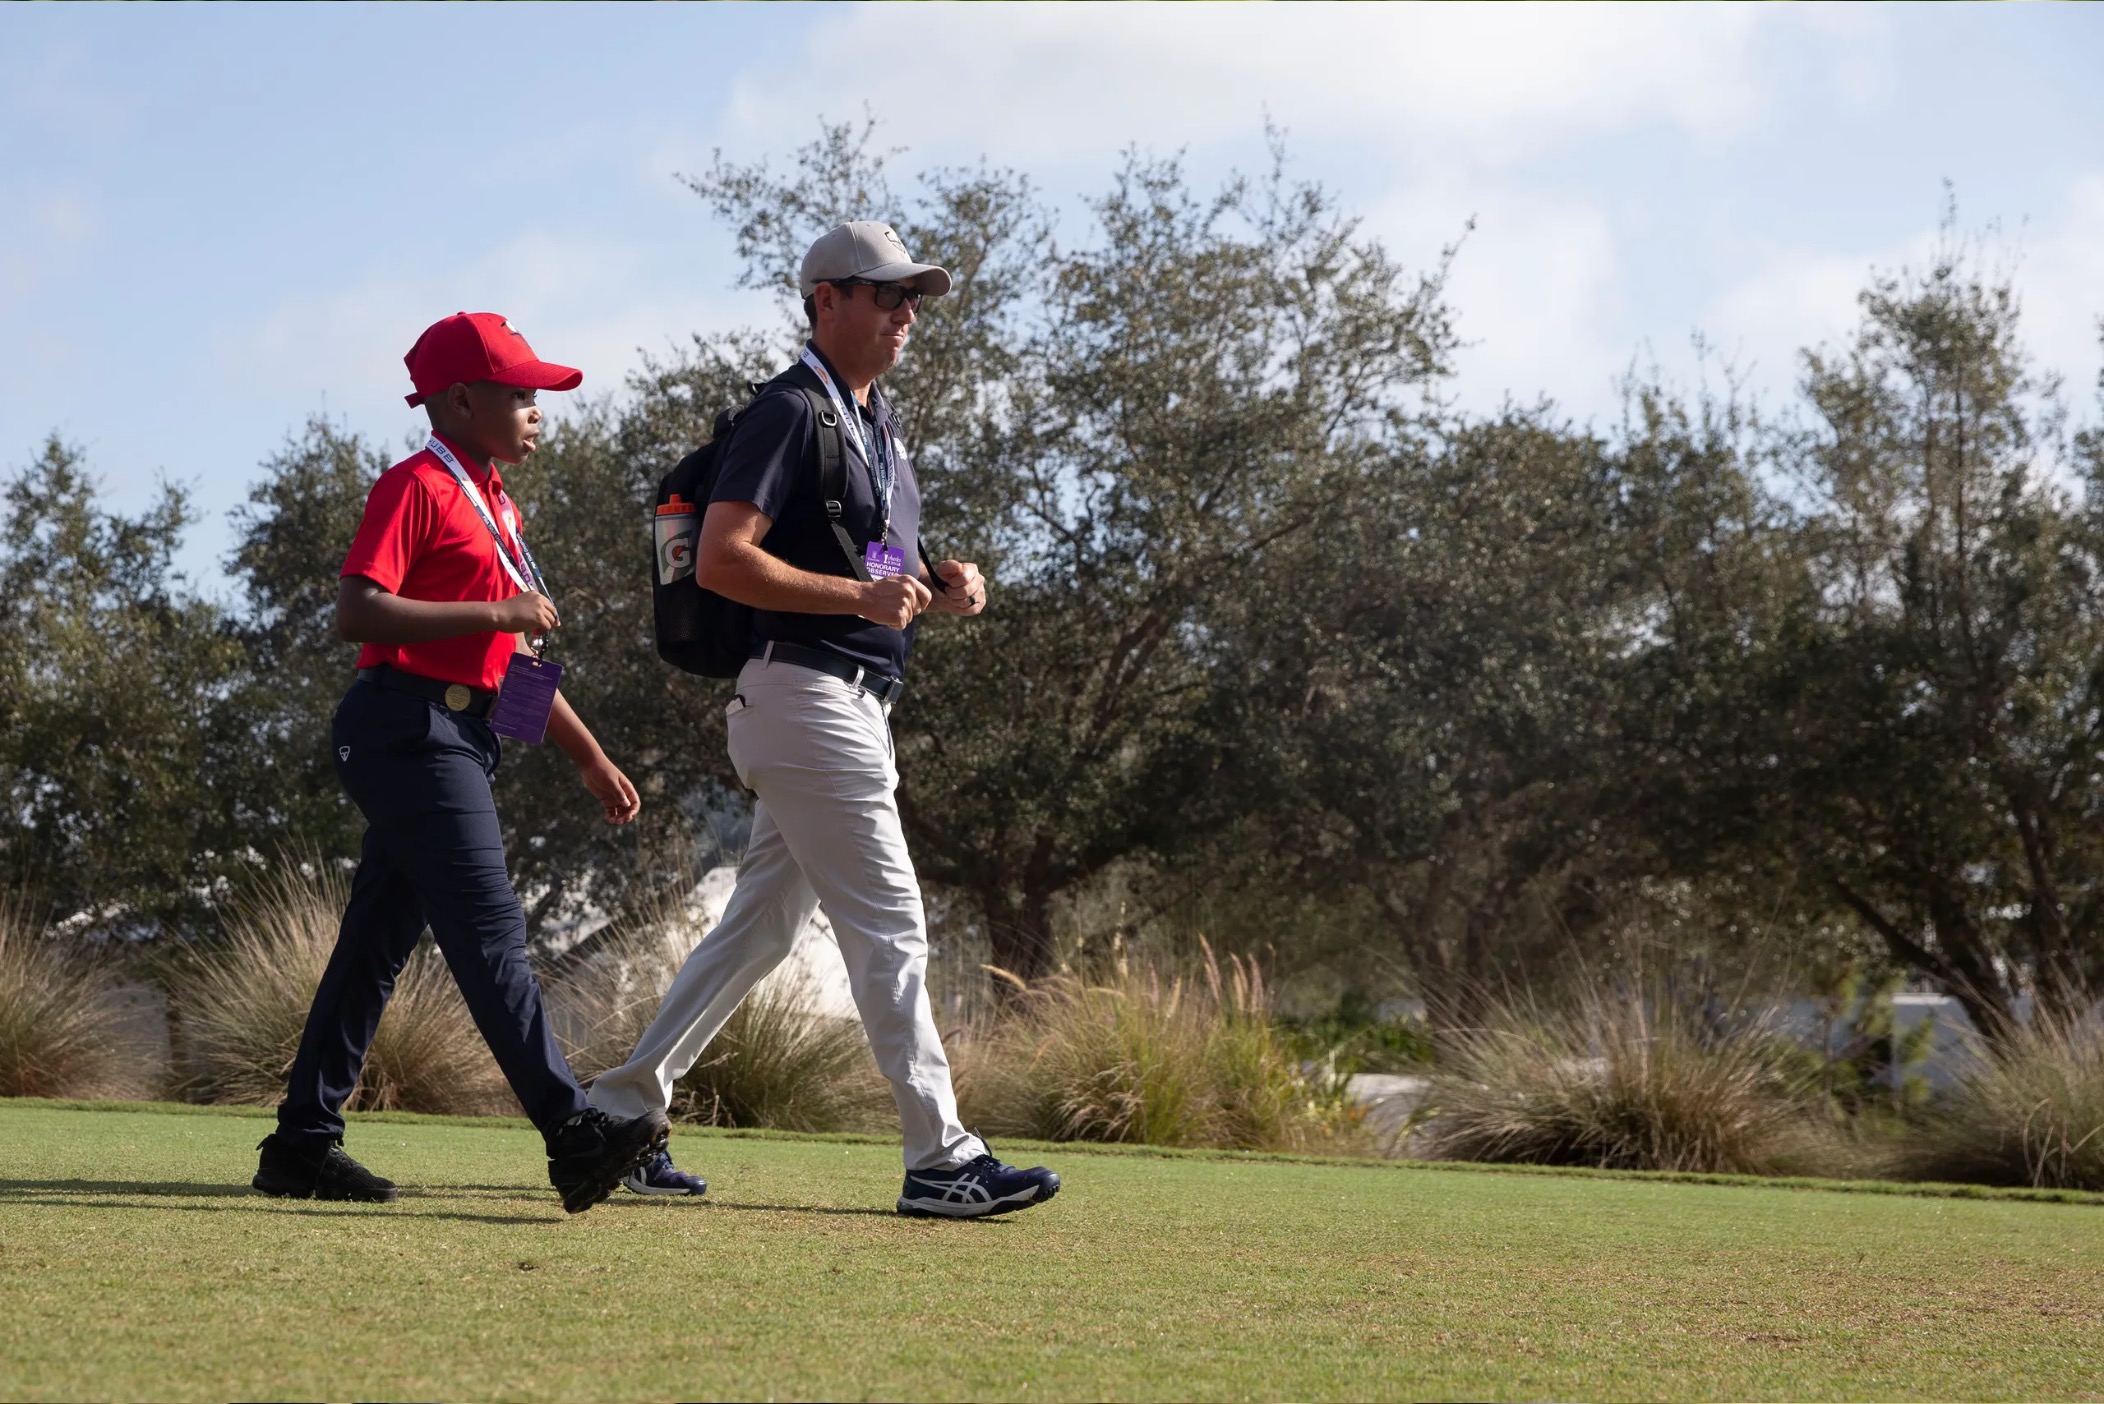 Carter Bonas, 10, and his golf instructor Corey Henry, of the Country Club of Coral Springs, walk off the tee box on the first hole during the first round of the Chubb Classic, Friday, Feb. 18, 2022, at Tiburón Golf Club at The Ritz-Carlton Golf Resort in Naples, Fla.